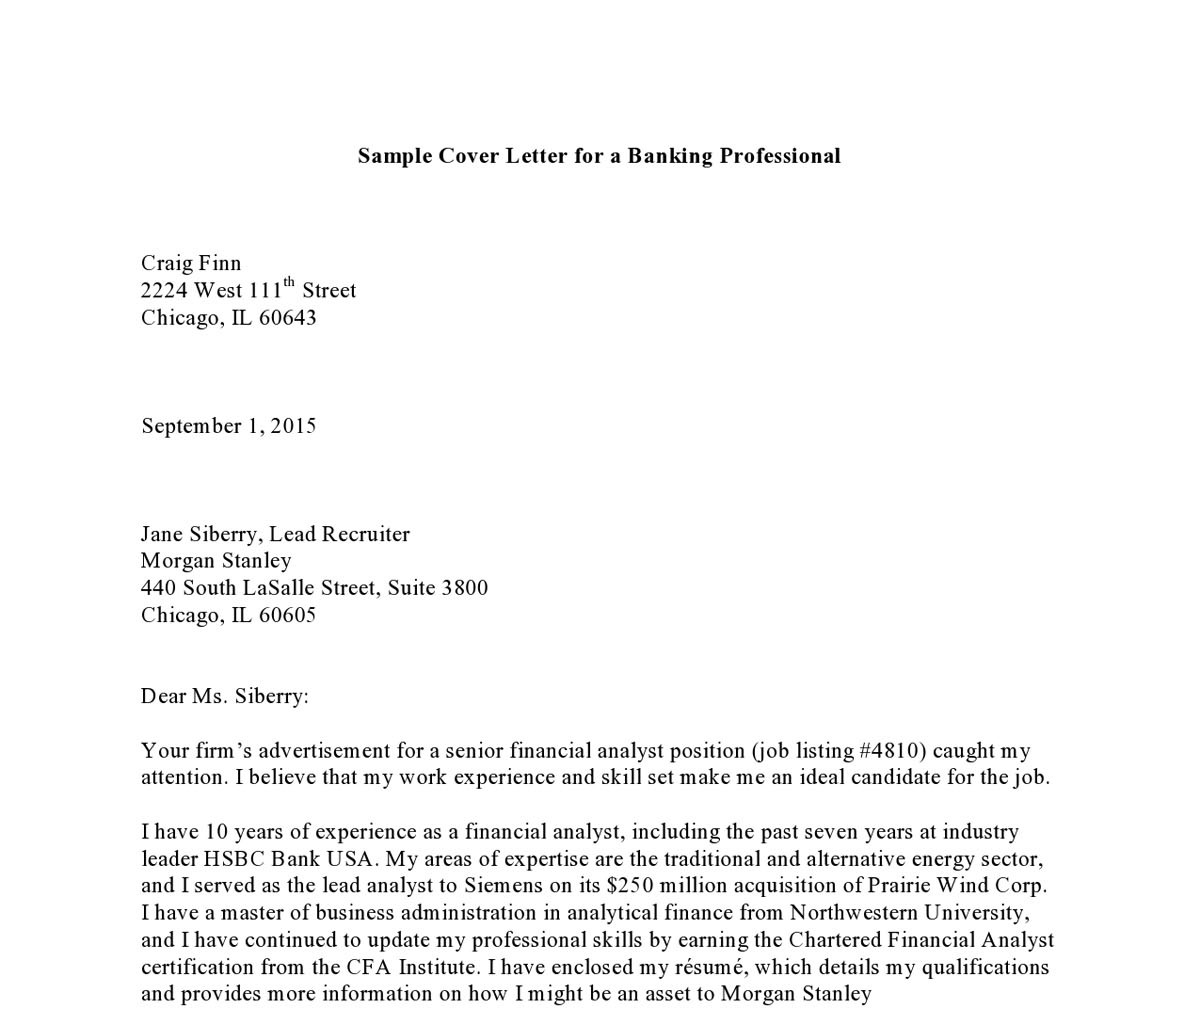 Example Cover Letter Cover Letter Tips How To Write A Good Cover Letter Vault